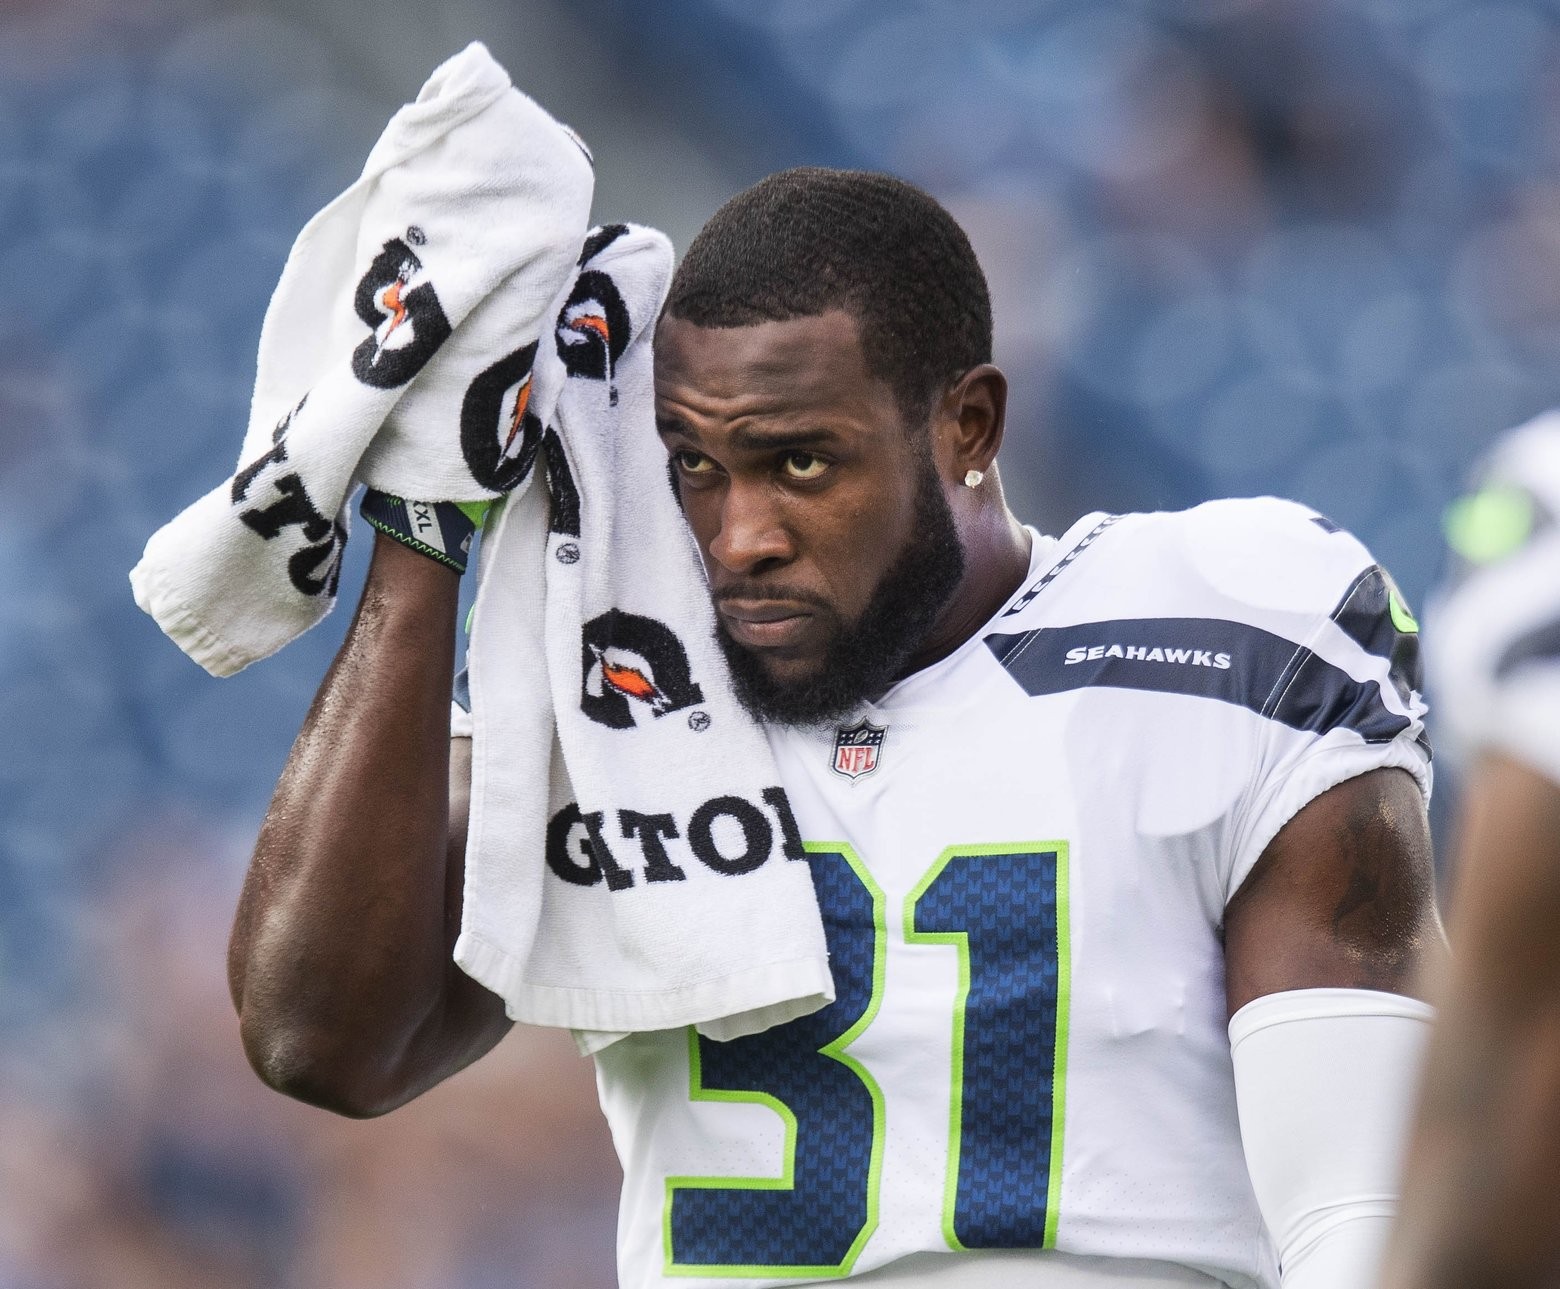 Kam Chancellor’s legacy with Seahawks will be one of intimidation, big hits